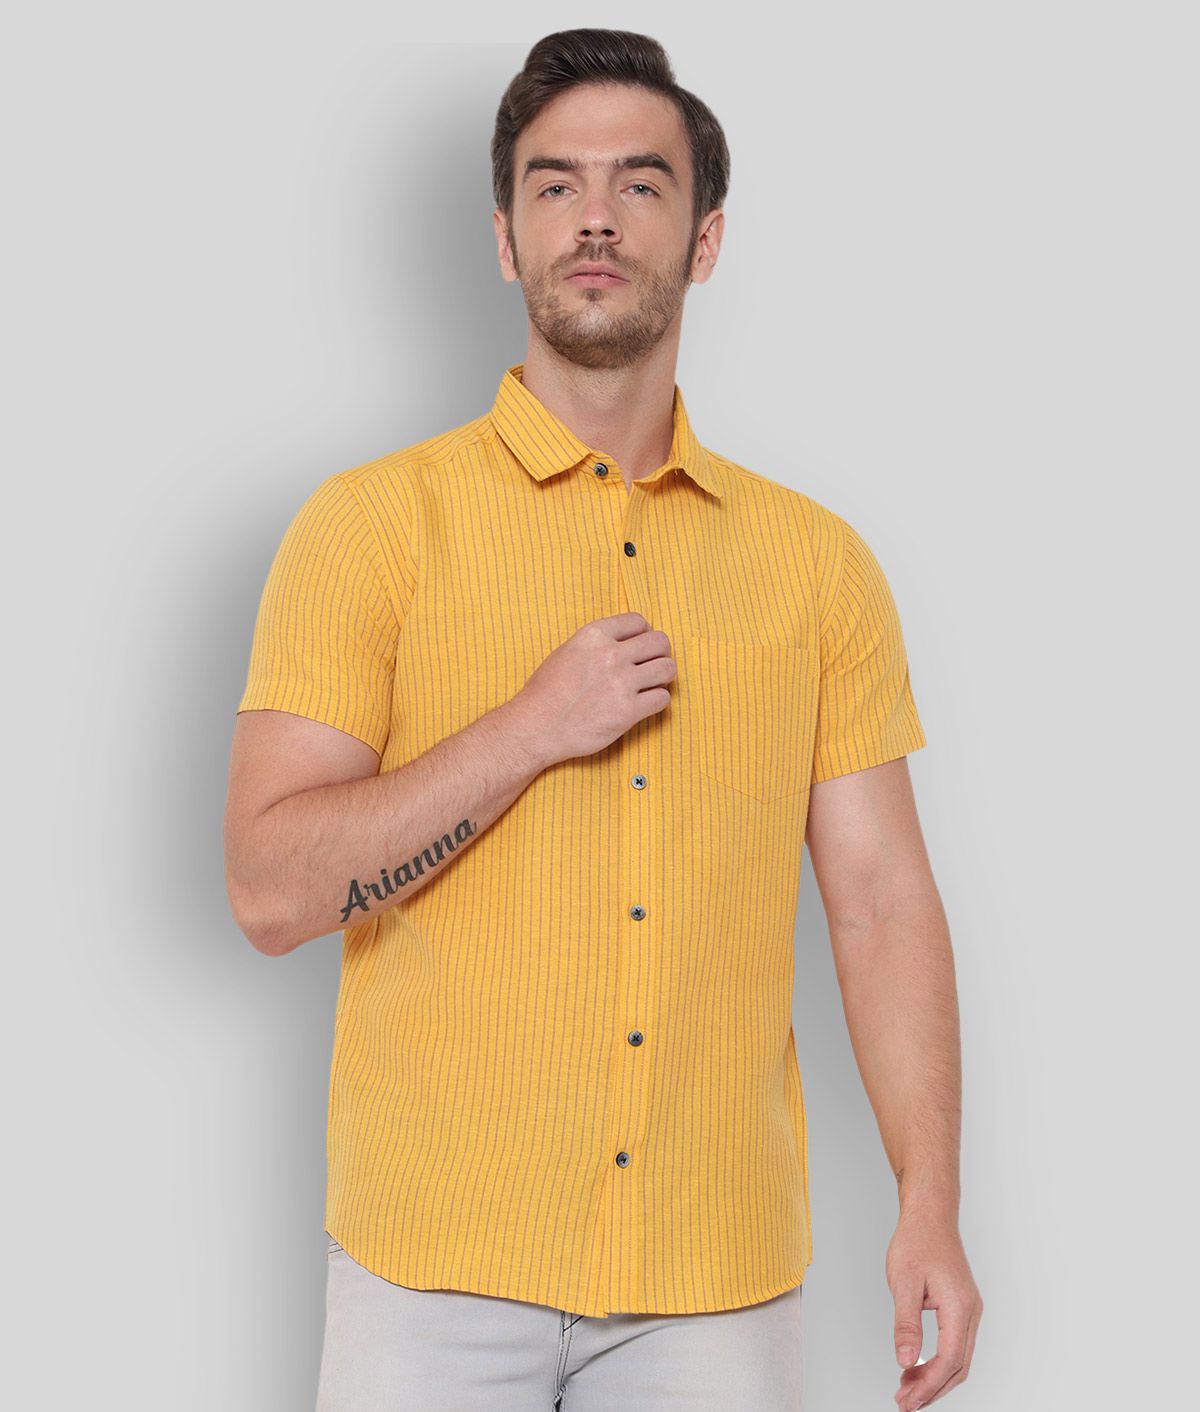     			Latest Chikan - Yellow Cotton Blend Regular Fit Men's Casual Shirt (Pack of 1)